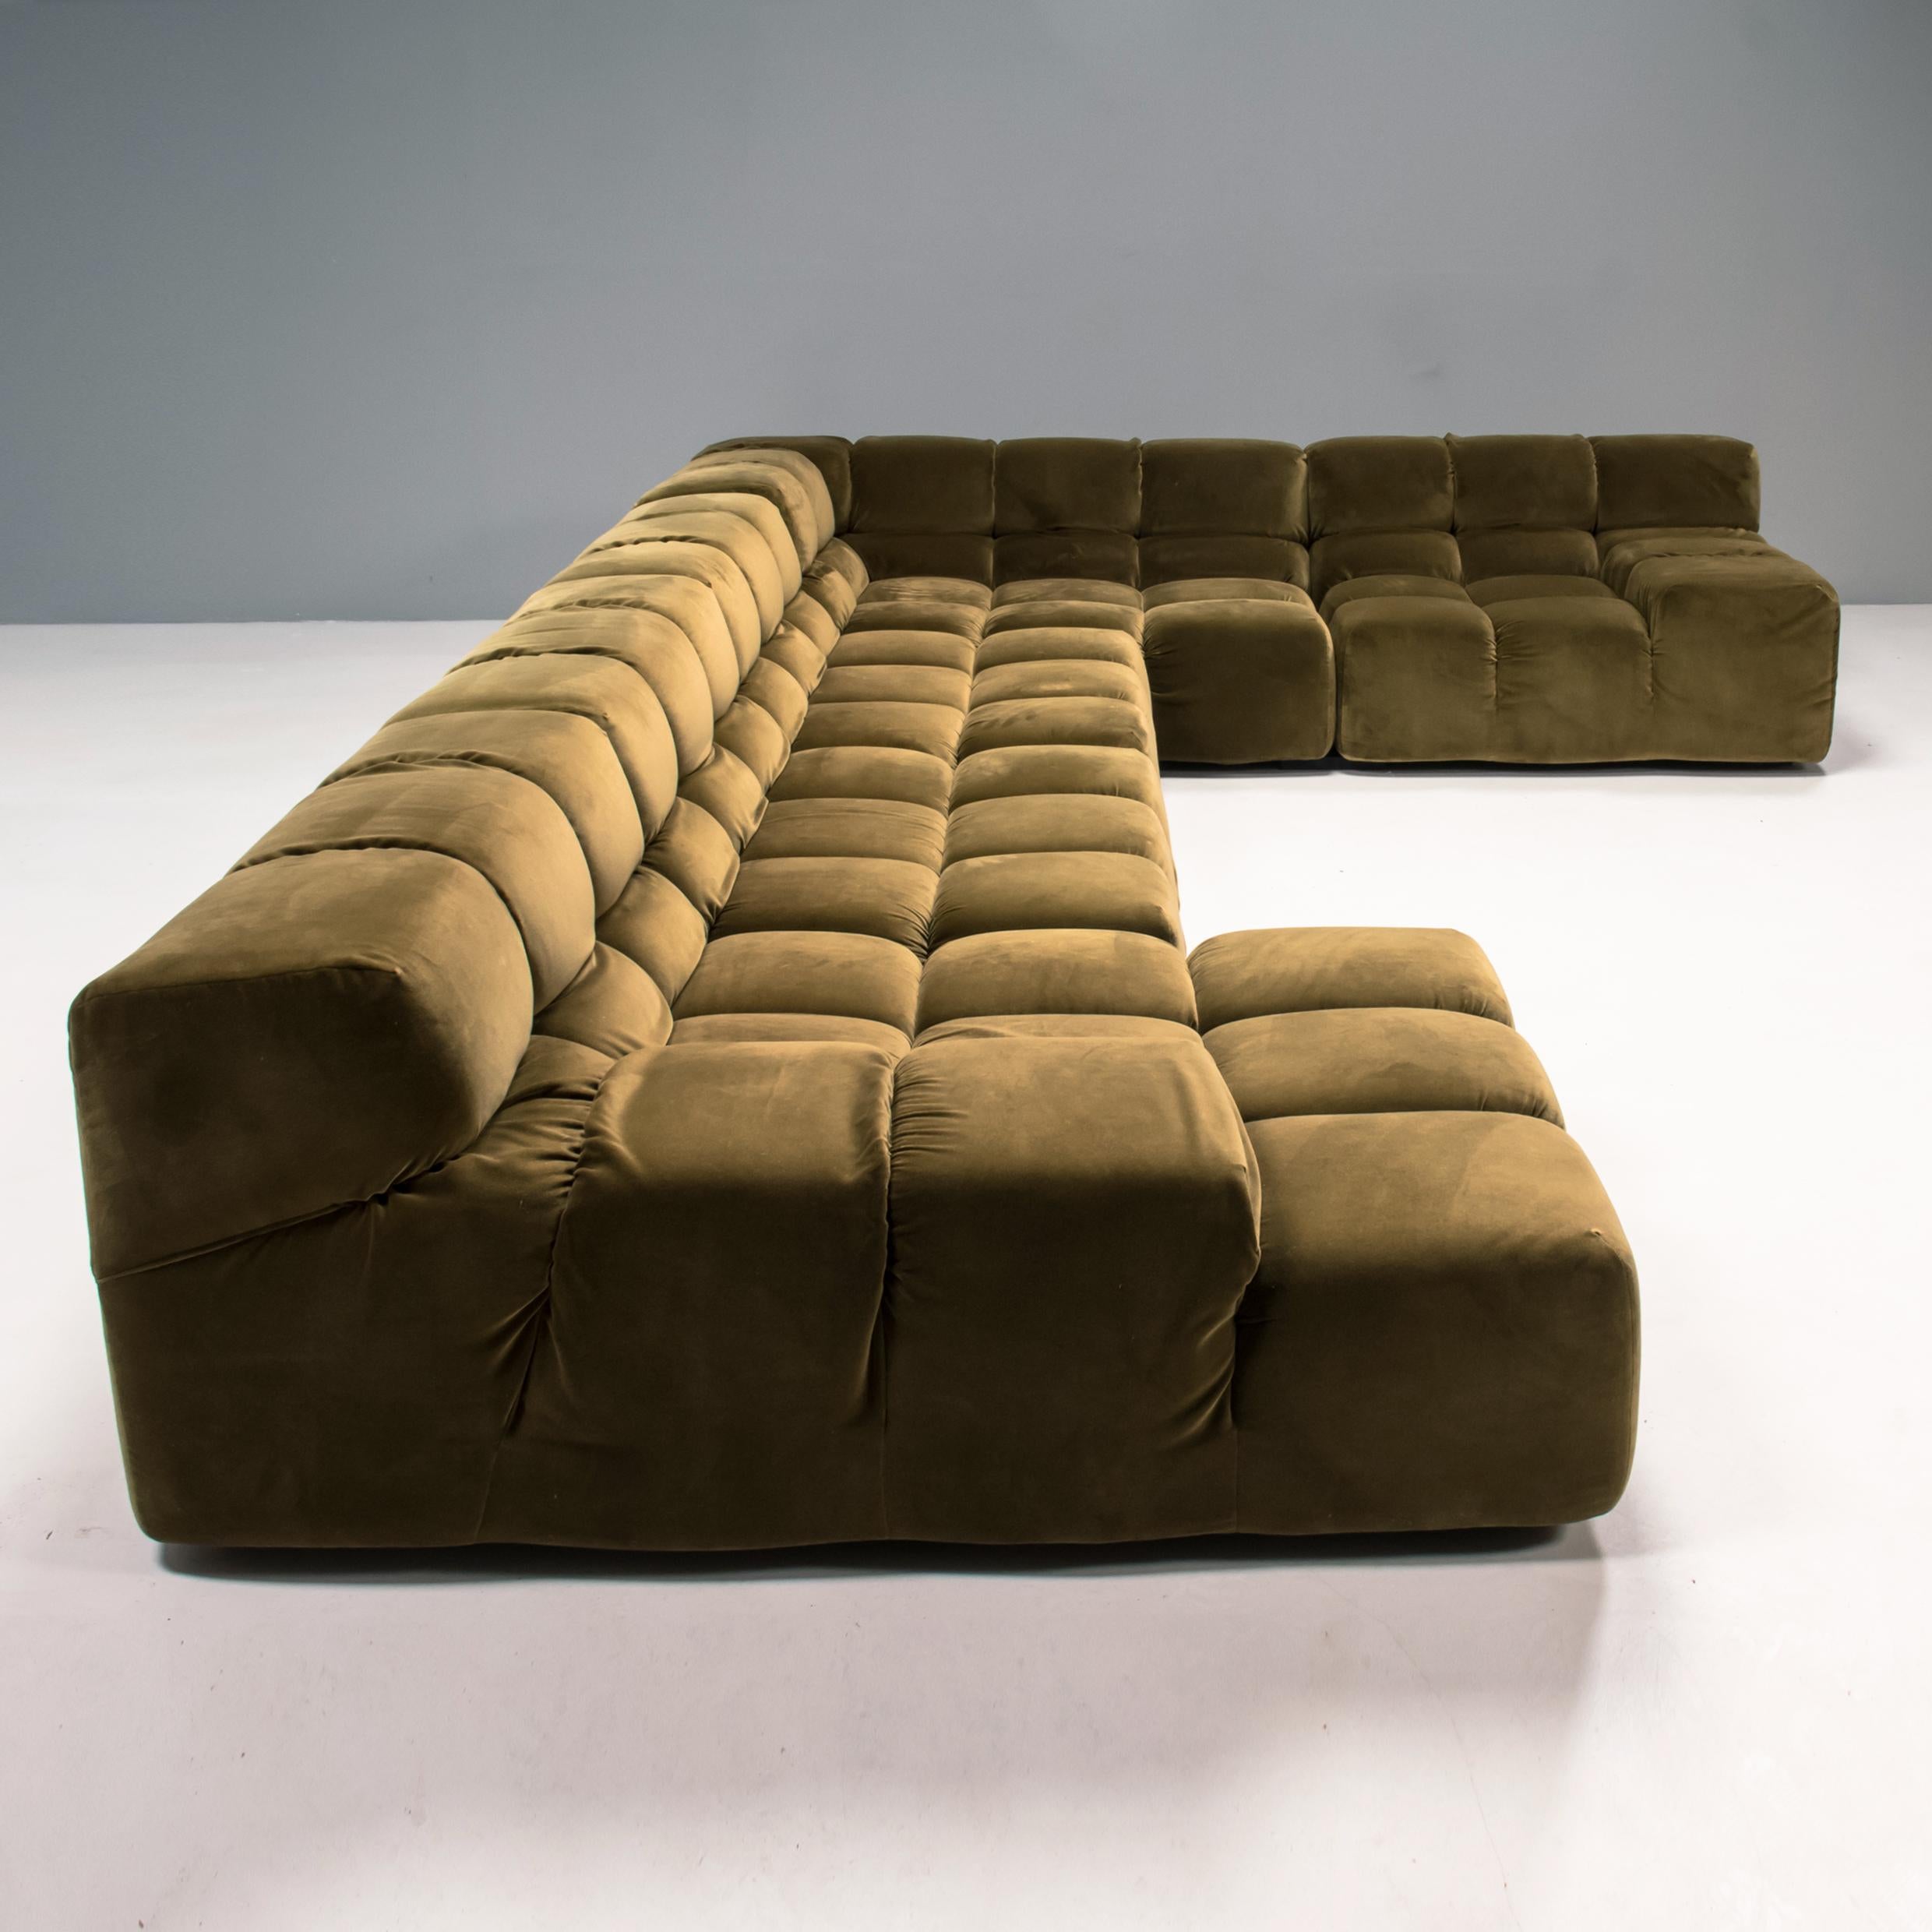 Designed by Patricia Urquiola, the Tufty sofa has become one of B&B Italia’s most iconic designs.

The modular sofa is made up of five separate pieces including a right hand chaise, a left hand corner section, armchair with armrest and two